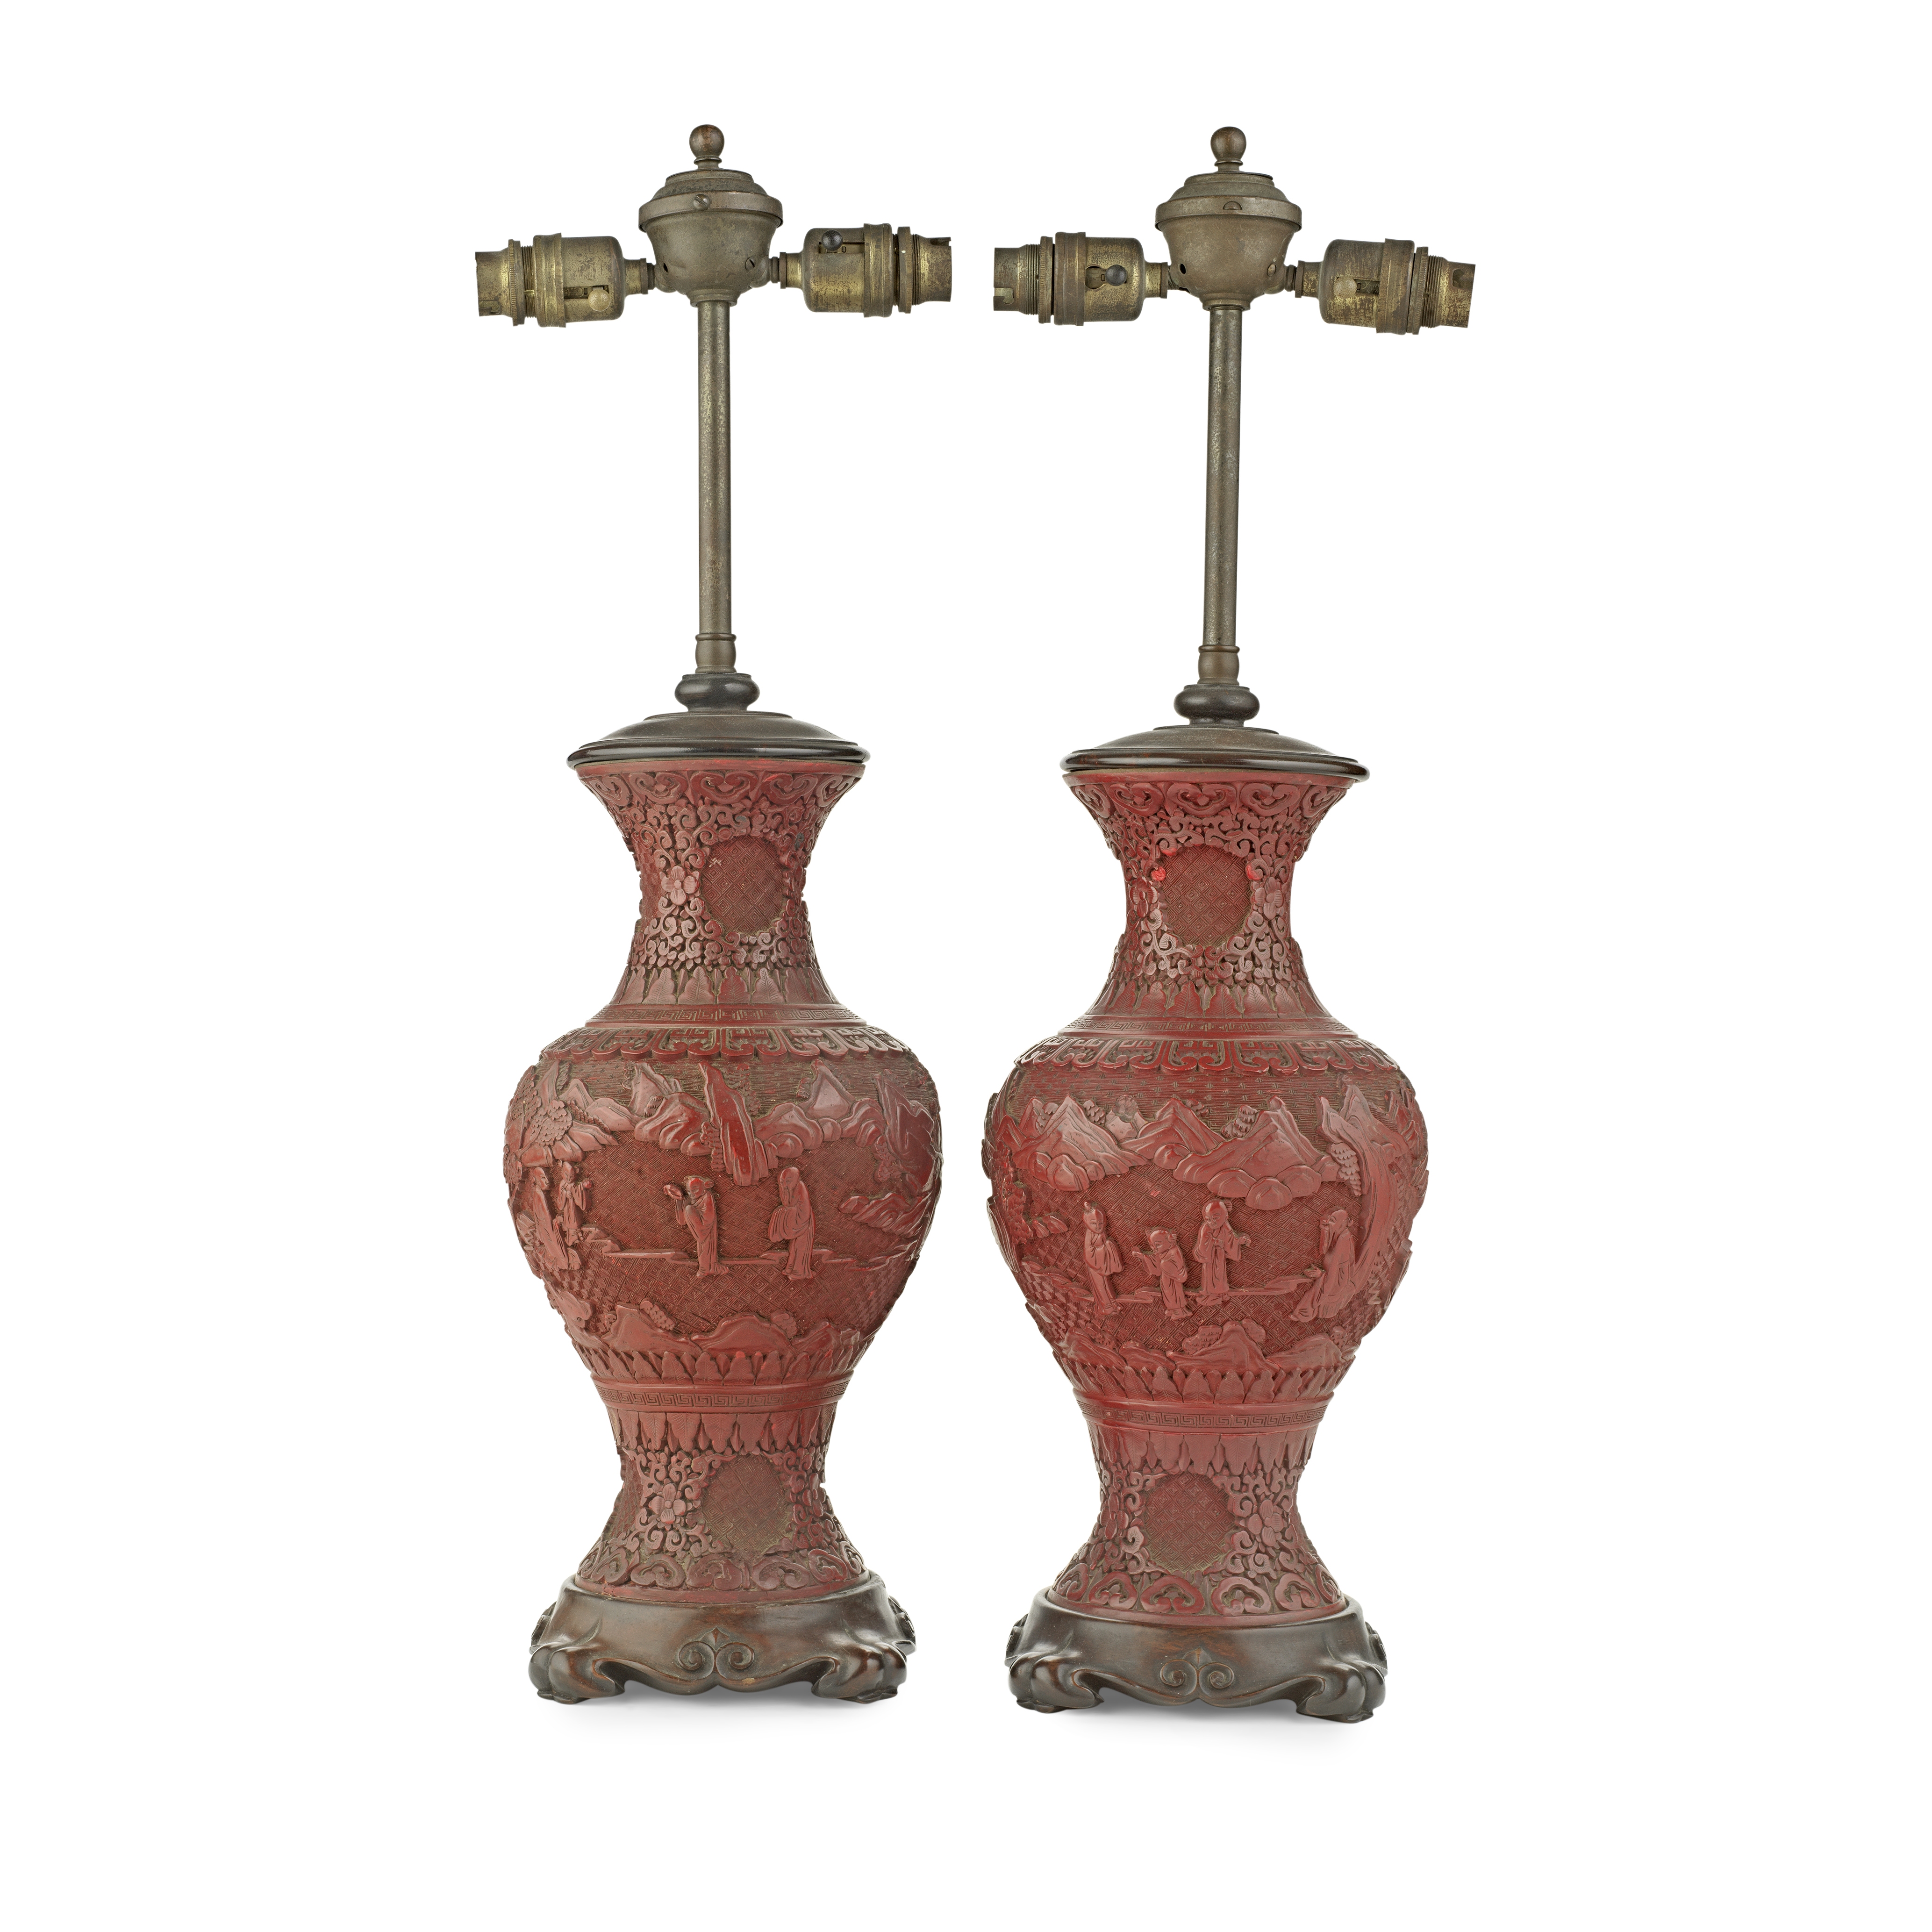 A PAIR OF CHINESE CINNABAR LACQUER TABLE LAMPS Late 19th / early 20th century (2)